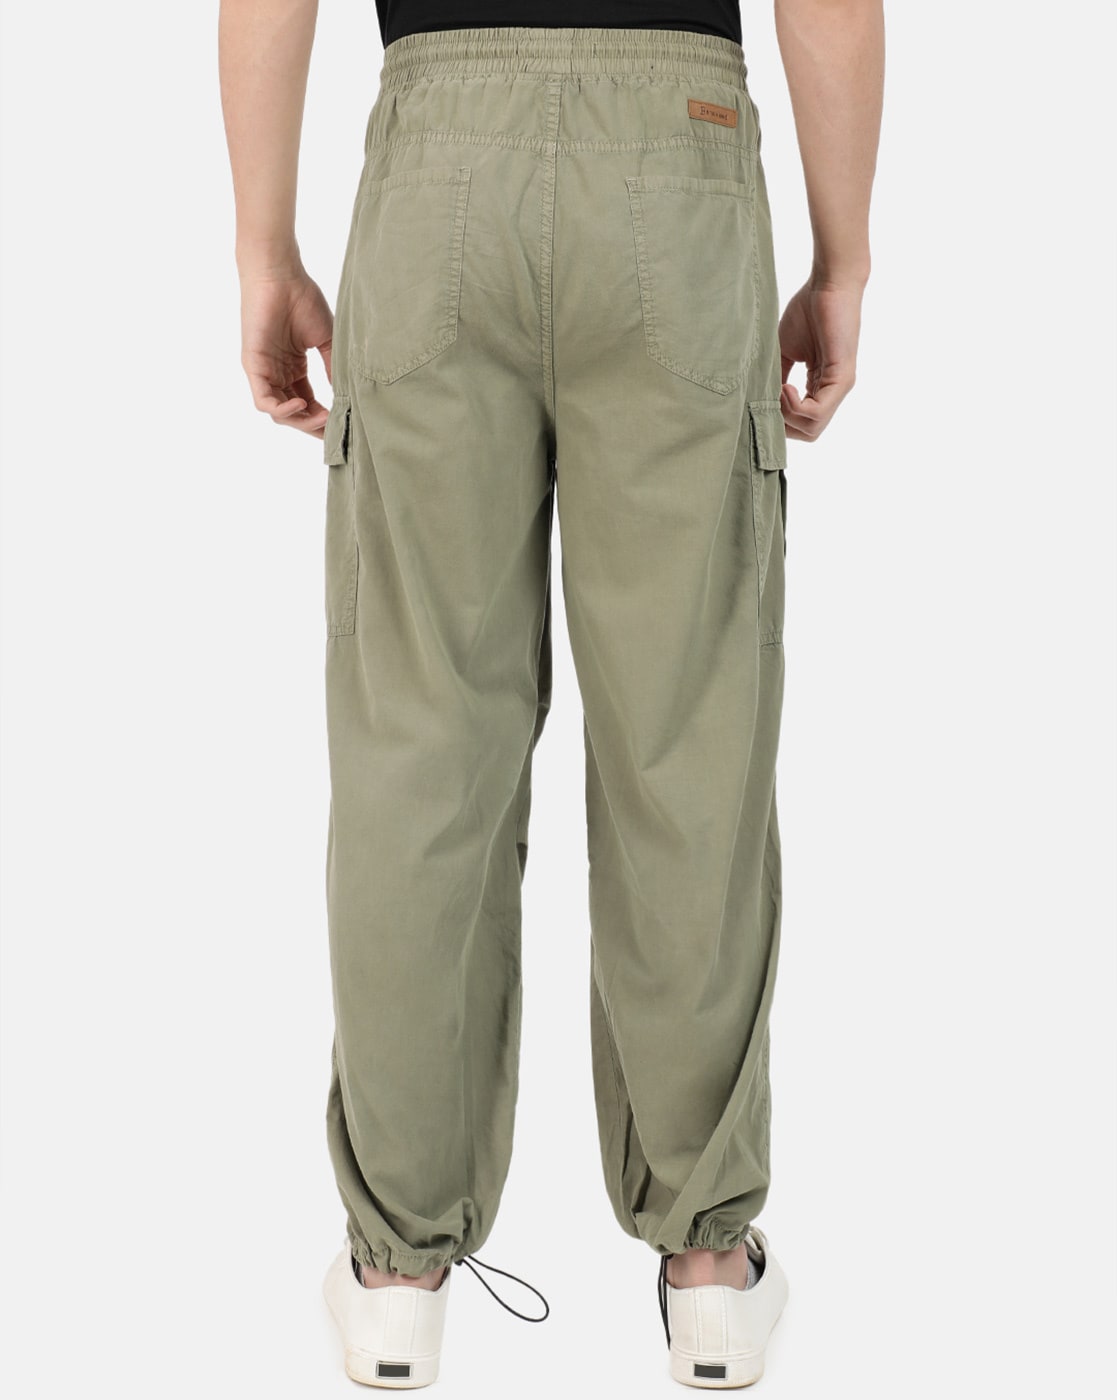 Cargo Pants for Men Relaxed Fit Causal Slim Beach India | Ubuy